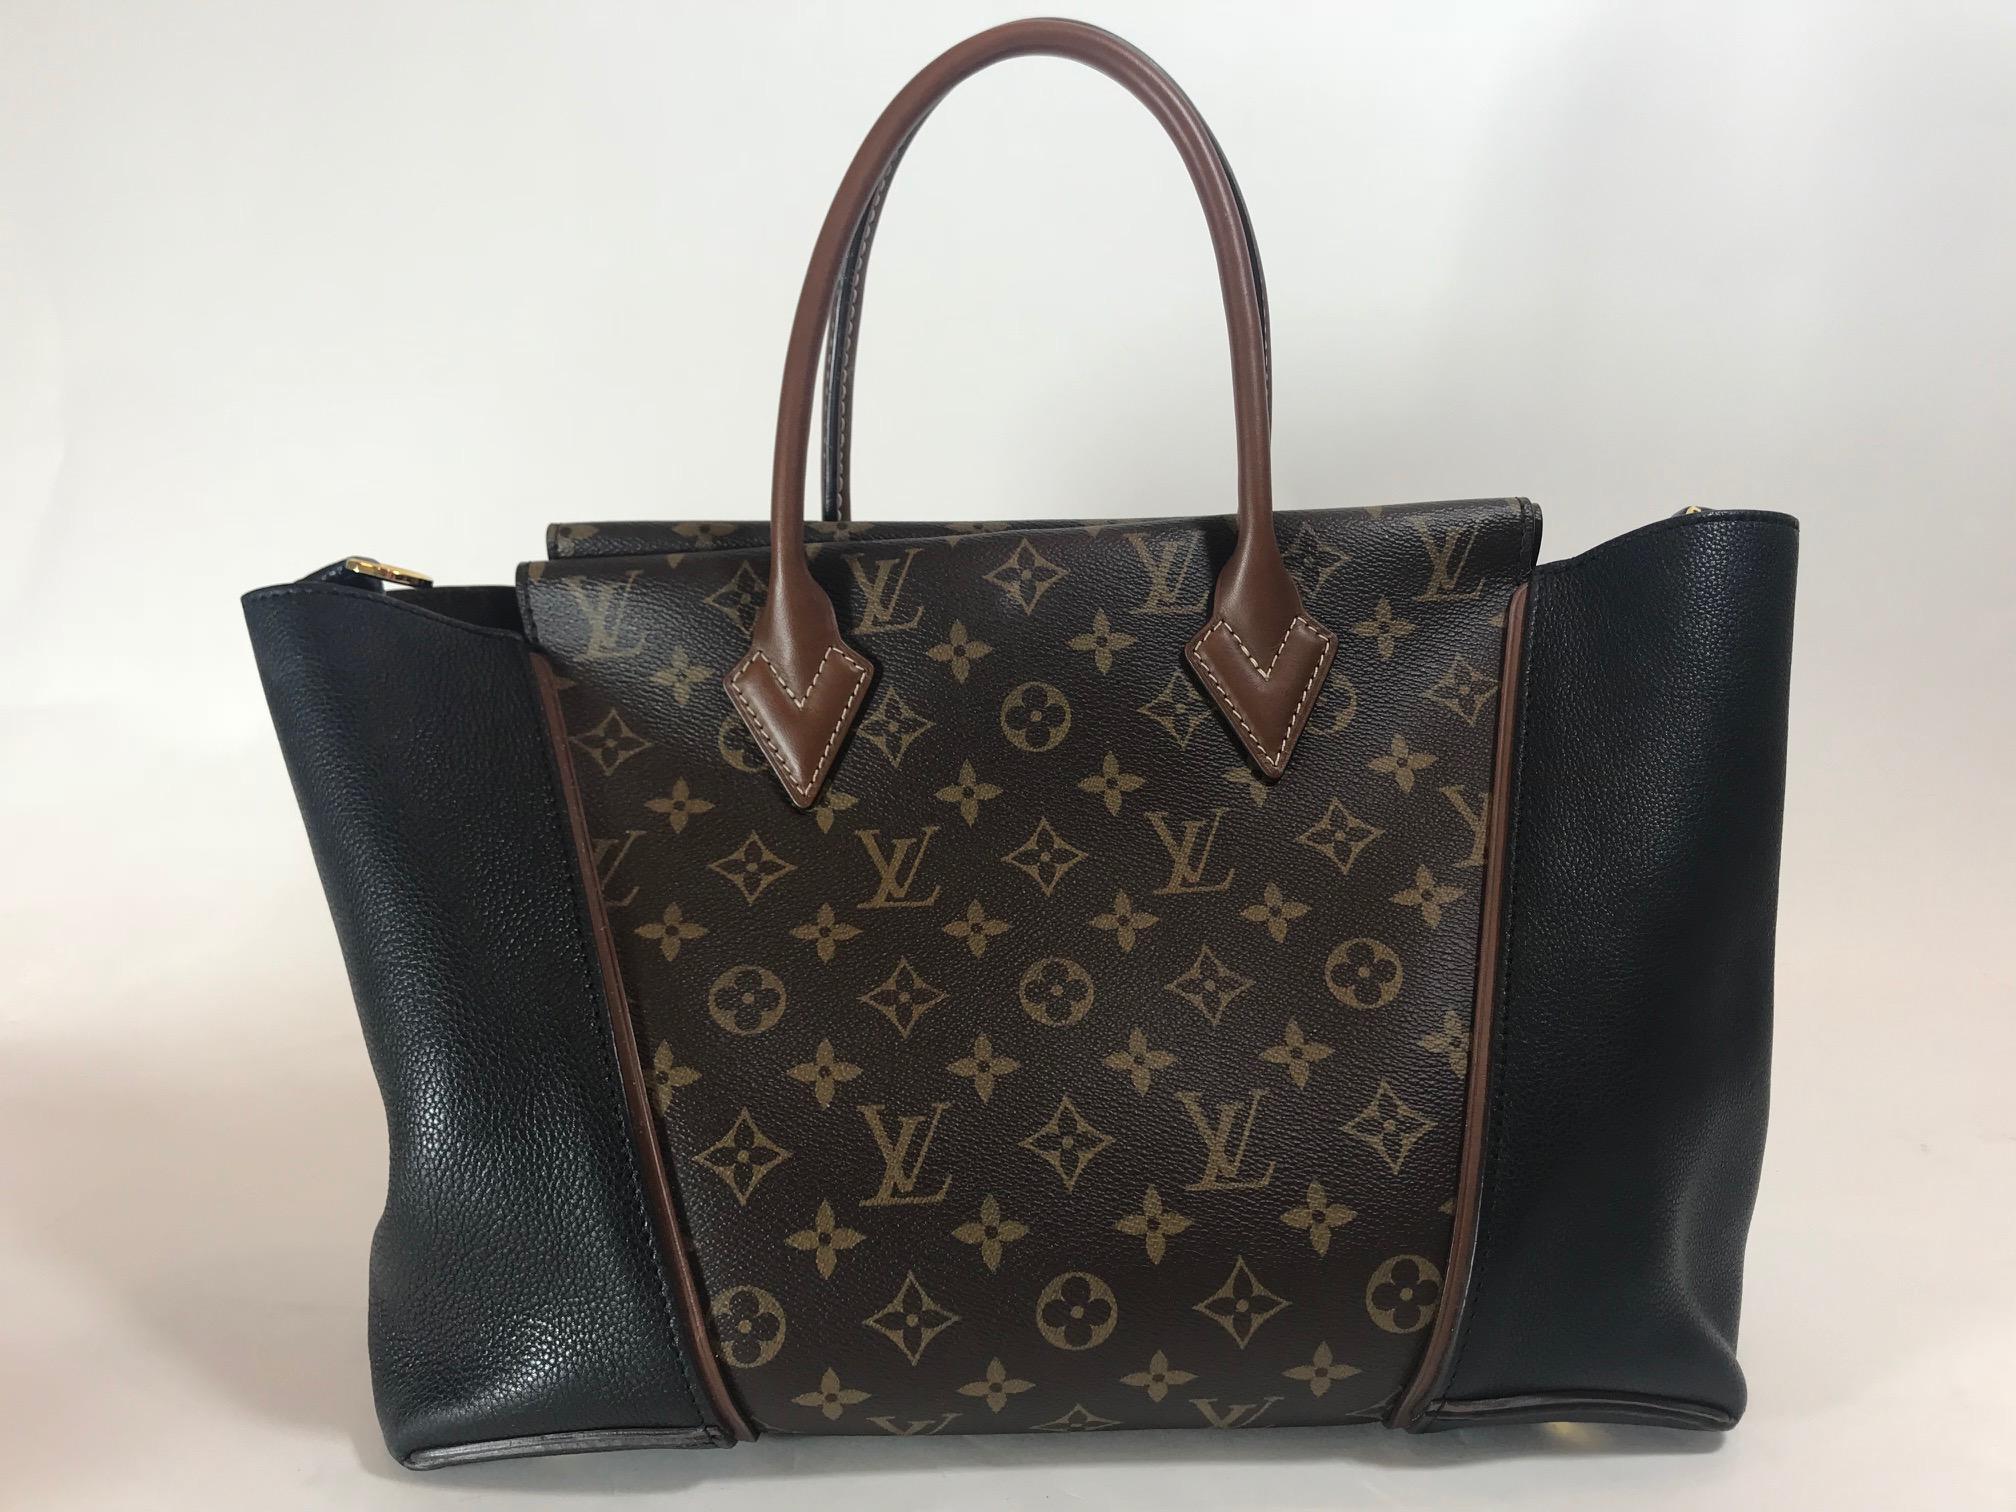 Louis Vuitton Monogram Tote W PM Noir Black In Good Condition For Sale In Roslyn, NY